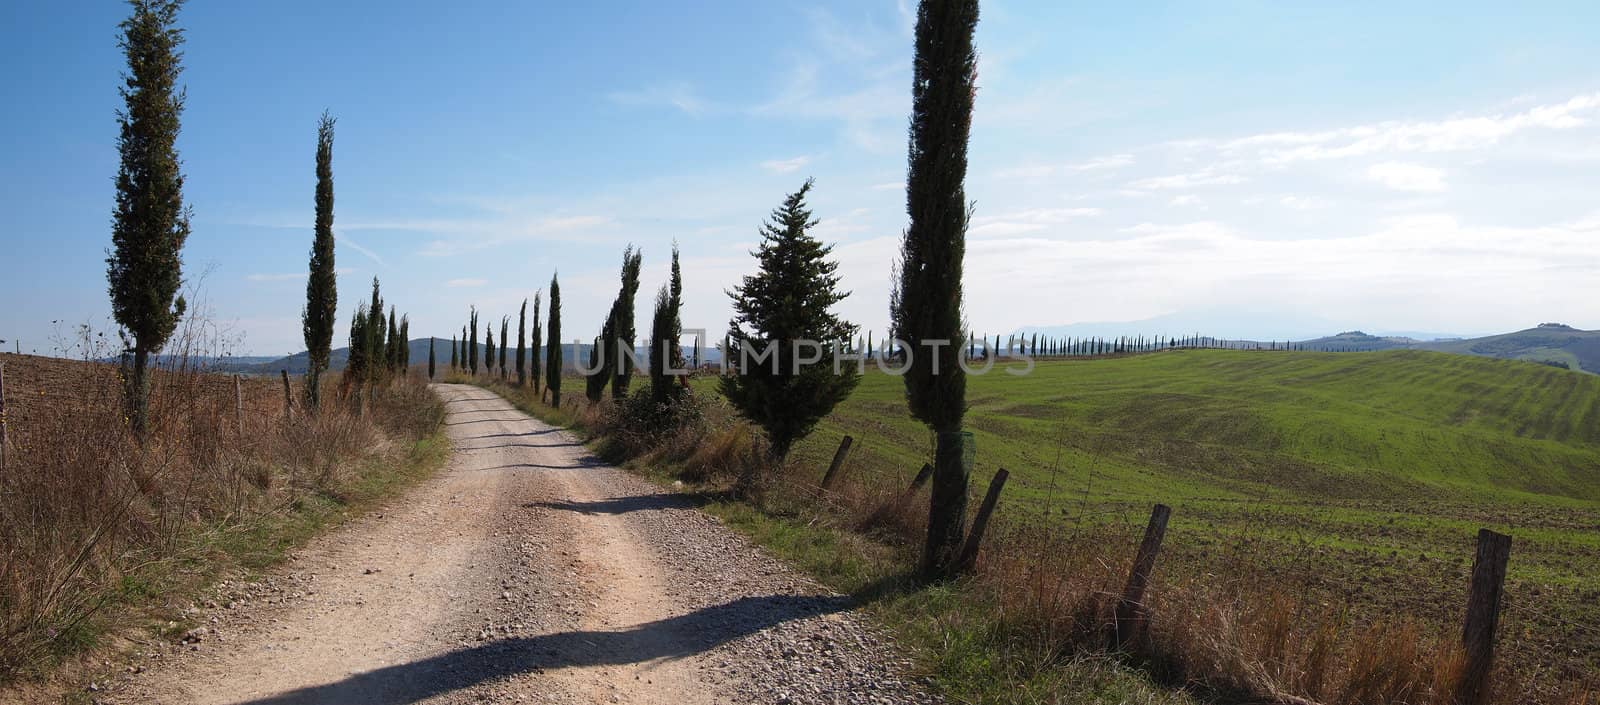 Rural road in Tuscany by pljvv